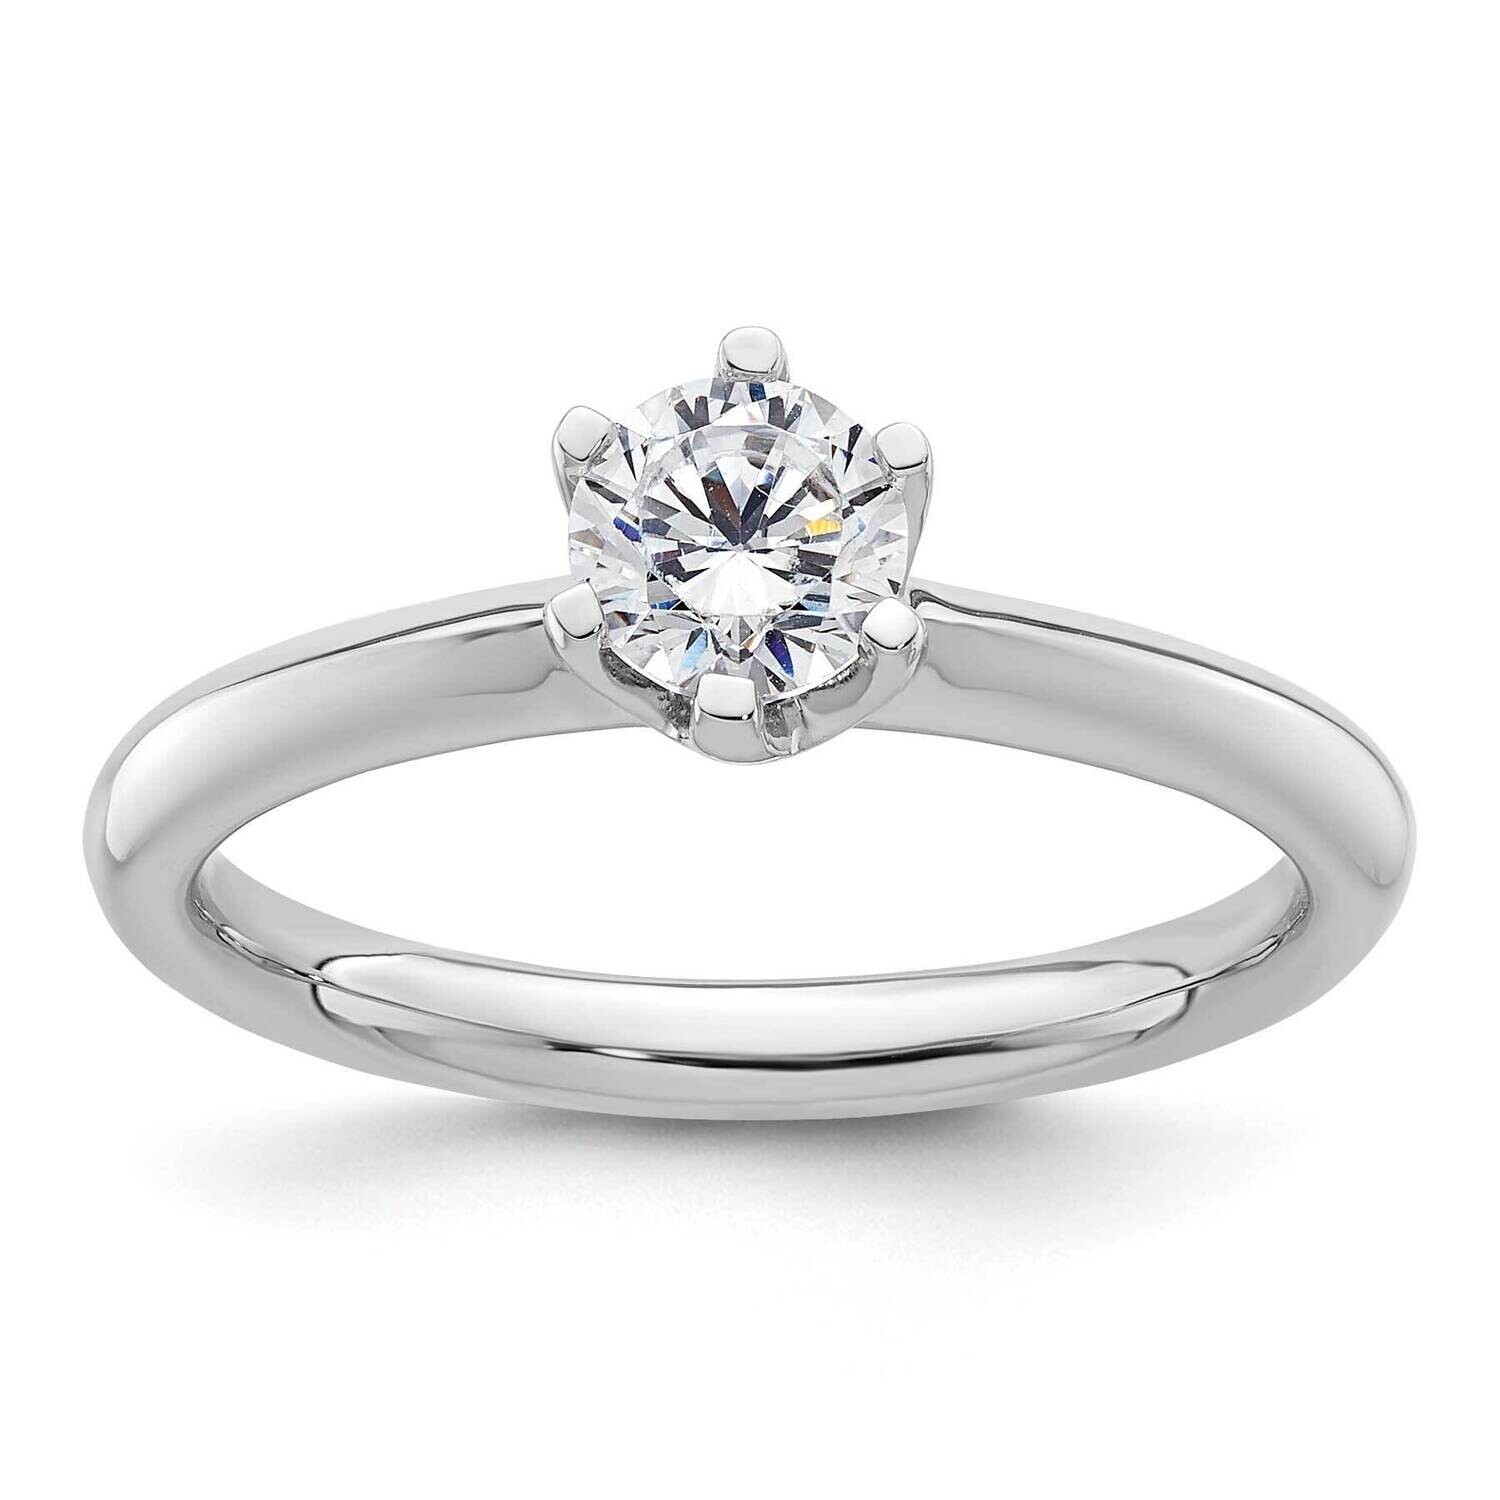 1/2 Carat 5.20 mm 6-Prong Round Solitaire Engagement Ring Mounting 14k White Gold RM1935E-050-CWAA